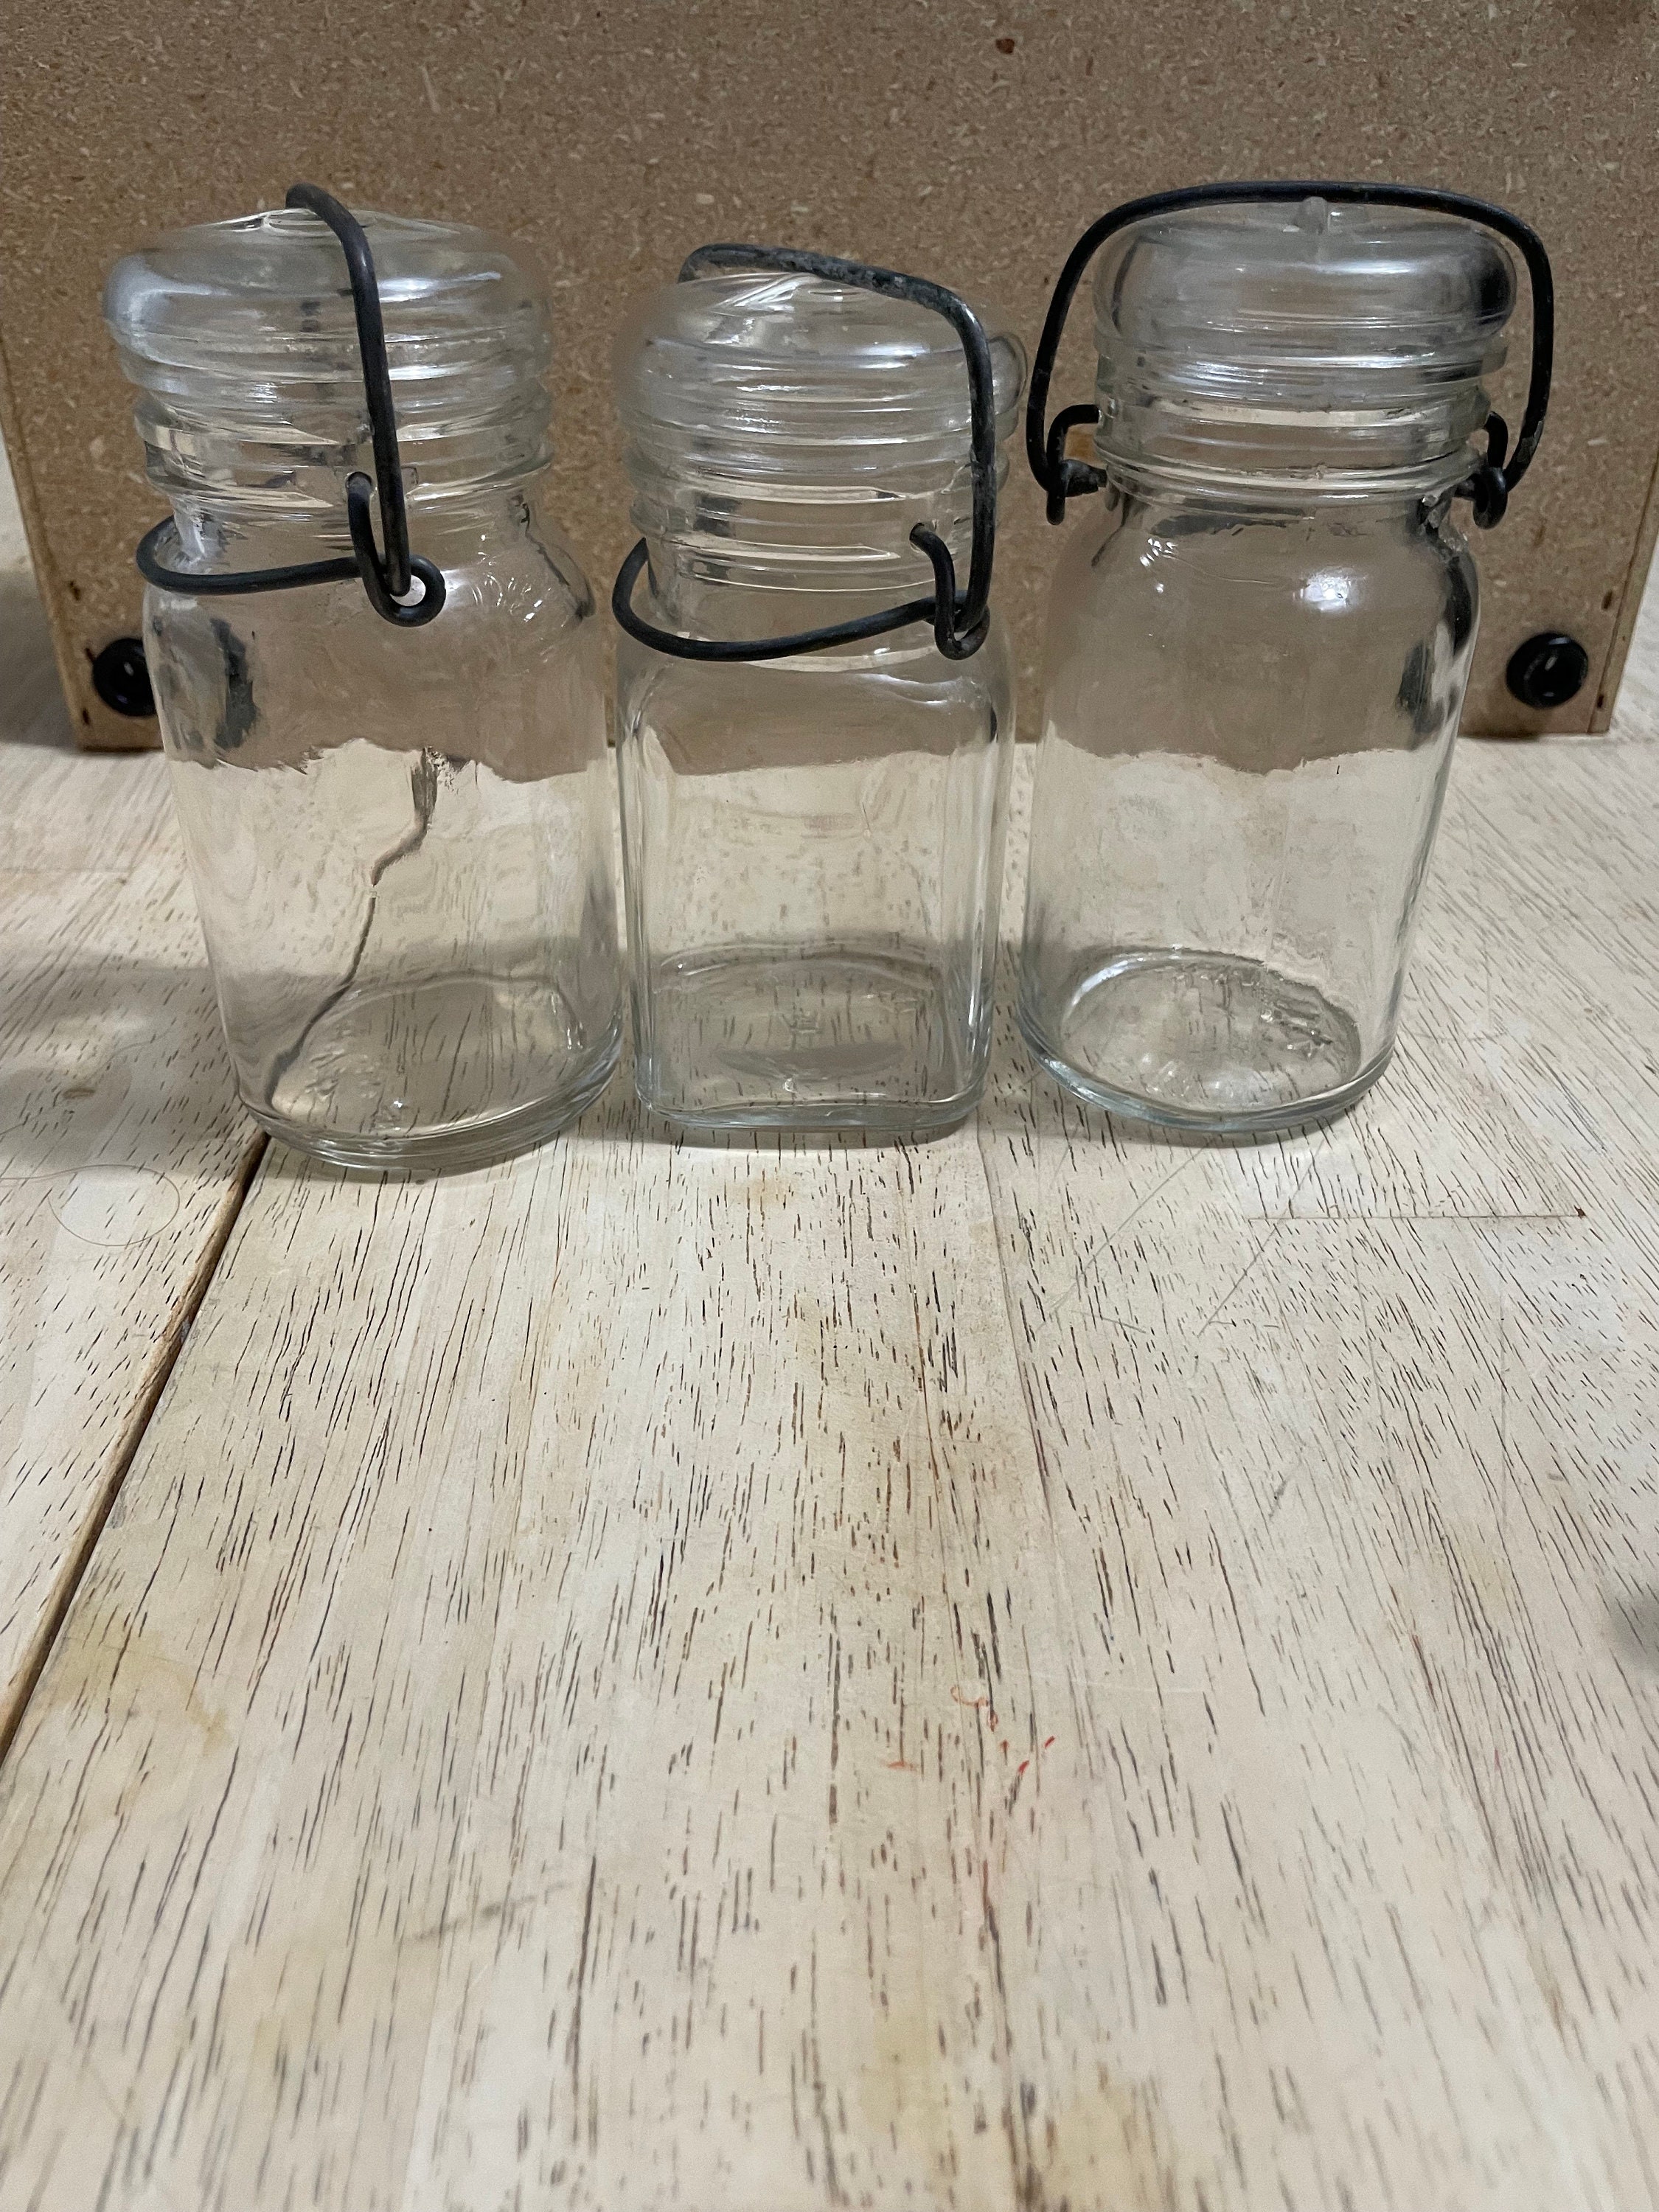 Lot of 4 Vintage Milk Glass Jars With Painted Lids. Avon and Other Unmarked  Jars . Great for Handmade Cosmetics. or Collecting. 